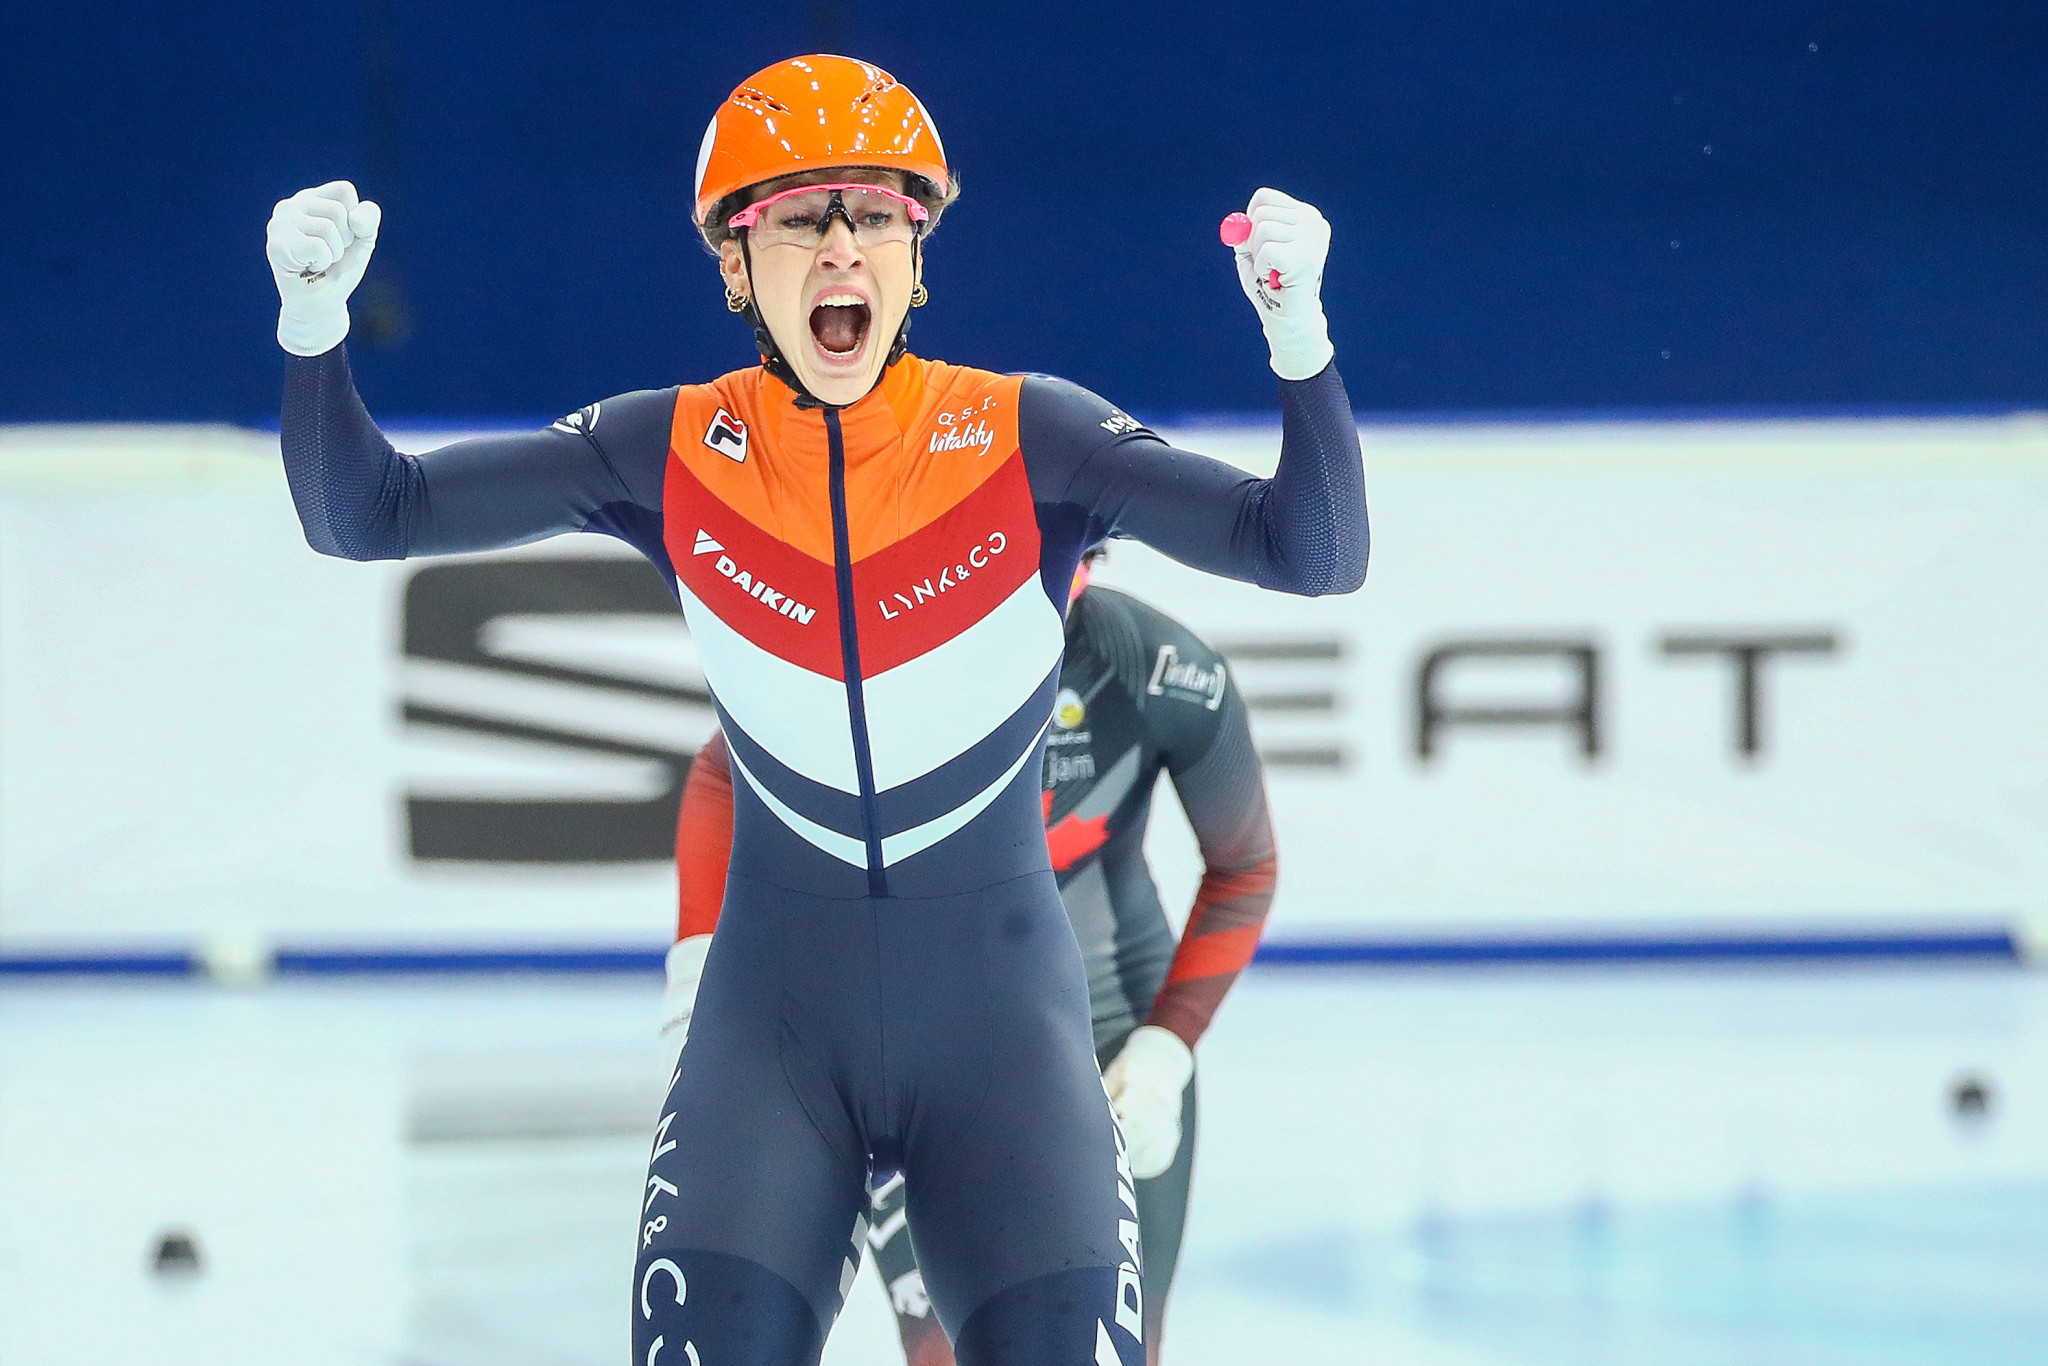 Schulting clinches clean sweep at Short Track World Cup in Debrecen